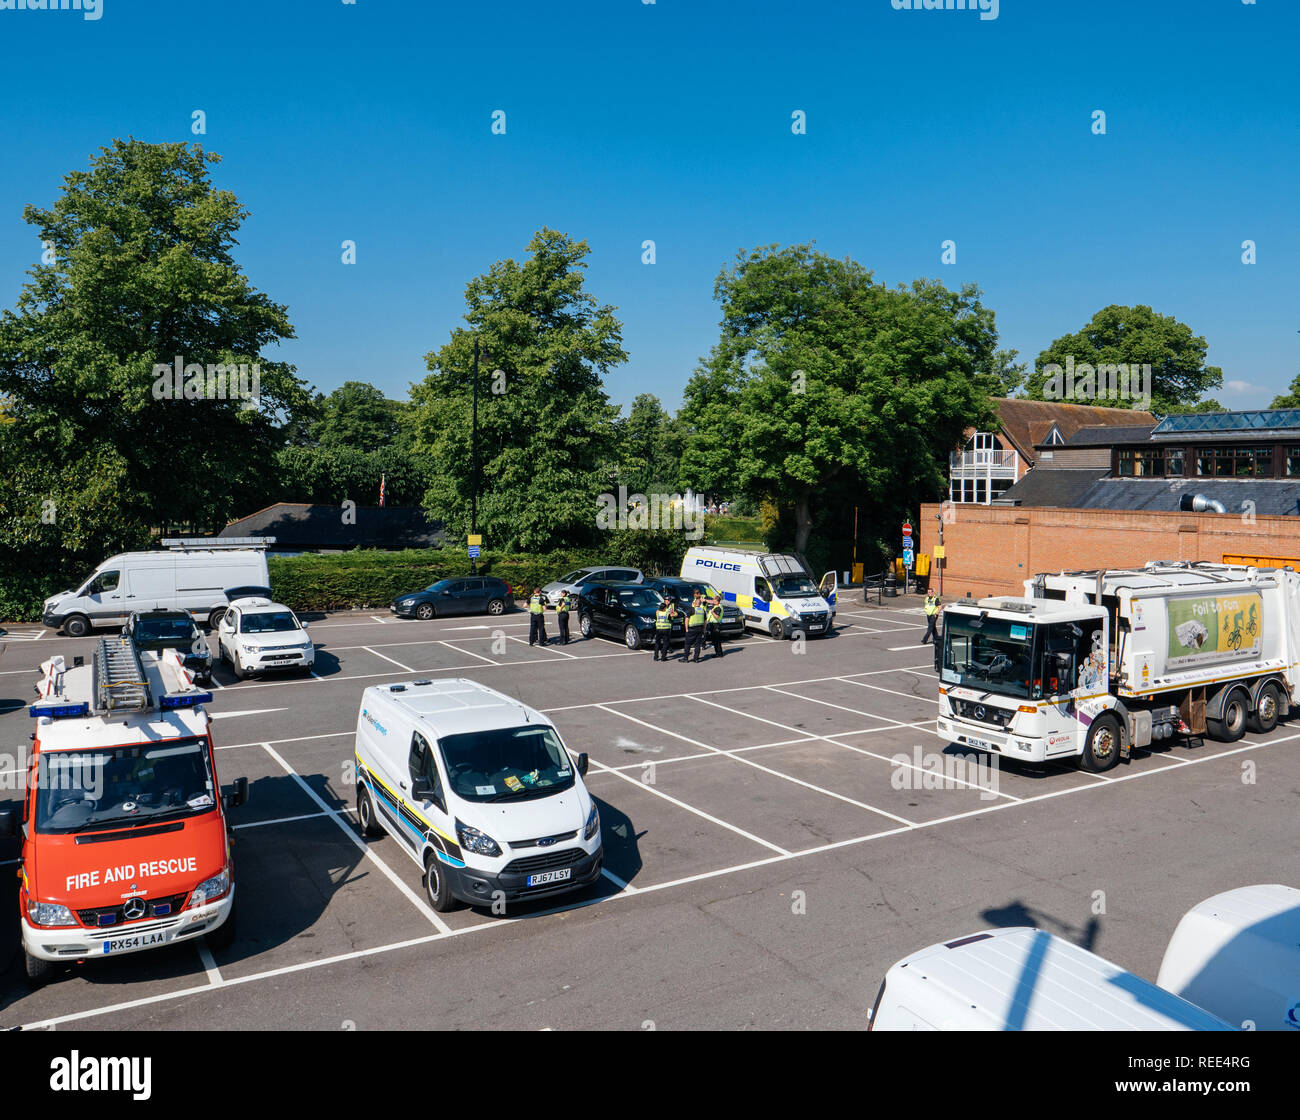 WINDSOR, UNITED KINGDOM - MAY 19, 2018: Security measures - ambulance, police, fire and resque, trucks ready for royal wedding marriage celebration of Prince Harry with Meghan Markle - aerial view Stock Photo